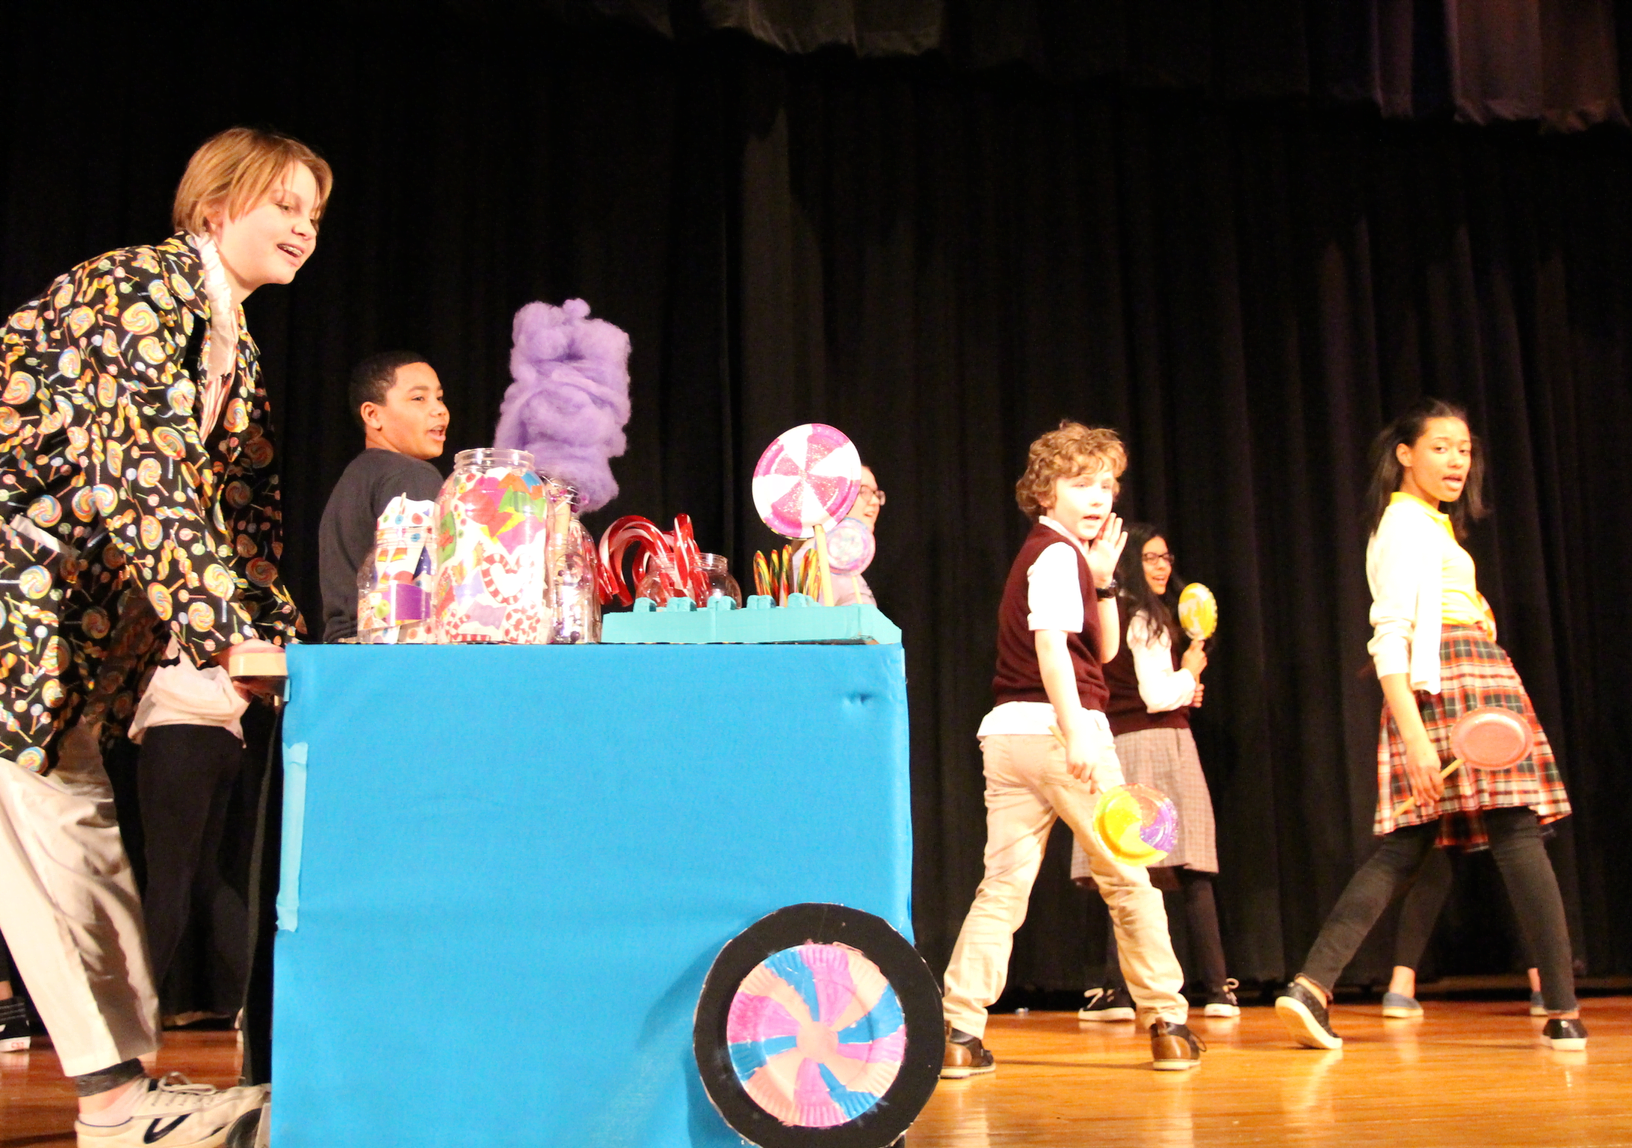 Western Middle School theater program will perform Willy Wonka Jr on March 29 and March 30. Photo: Leslie Yager